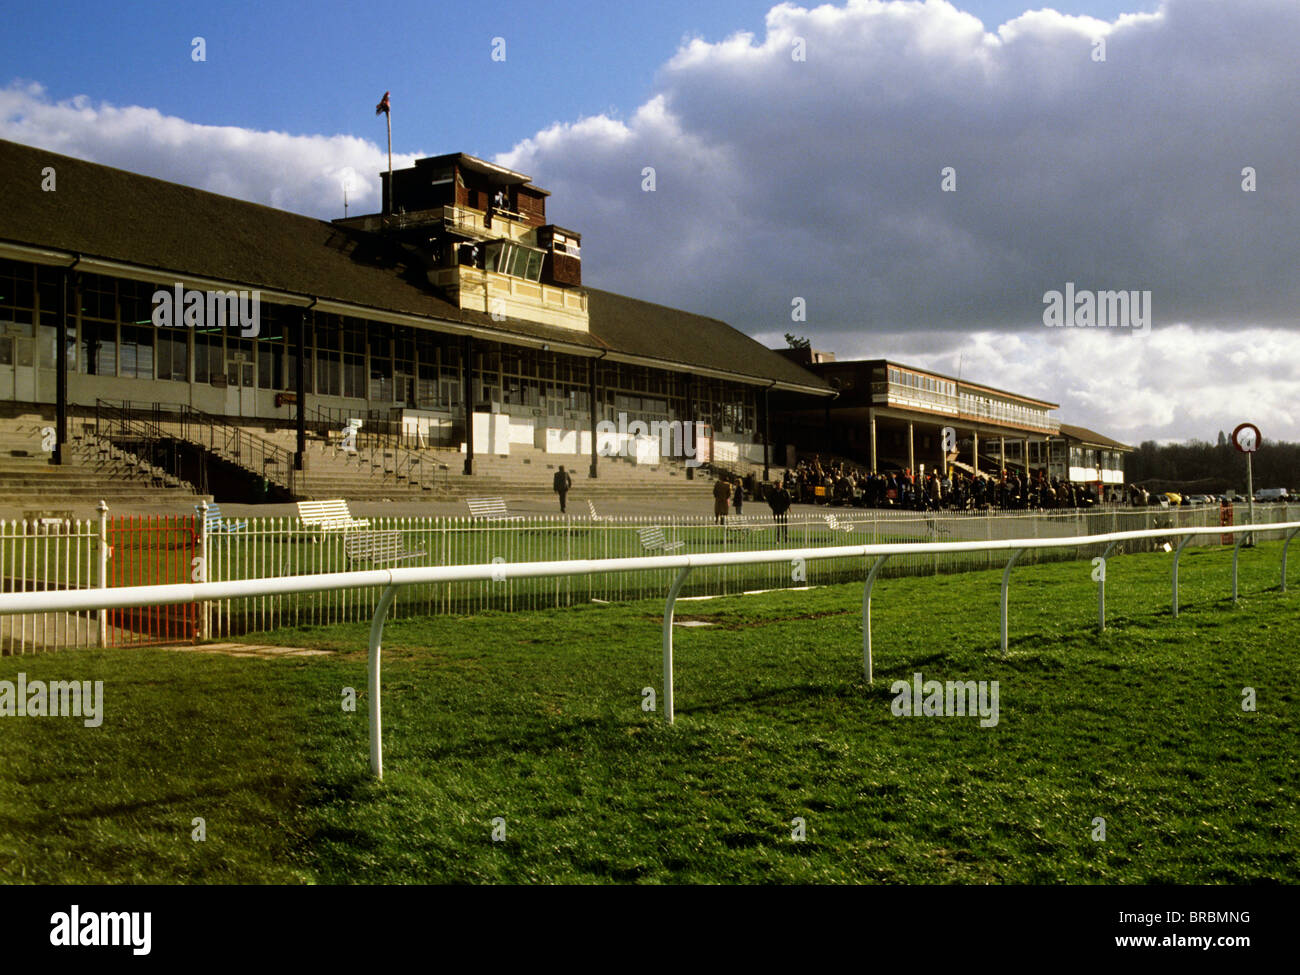 Grandstand at a race horse track Stock Photo